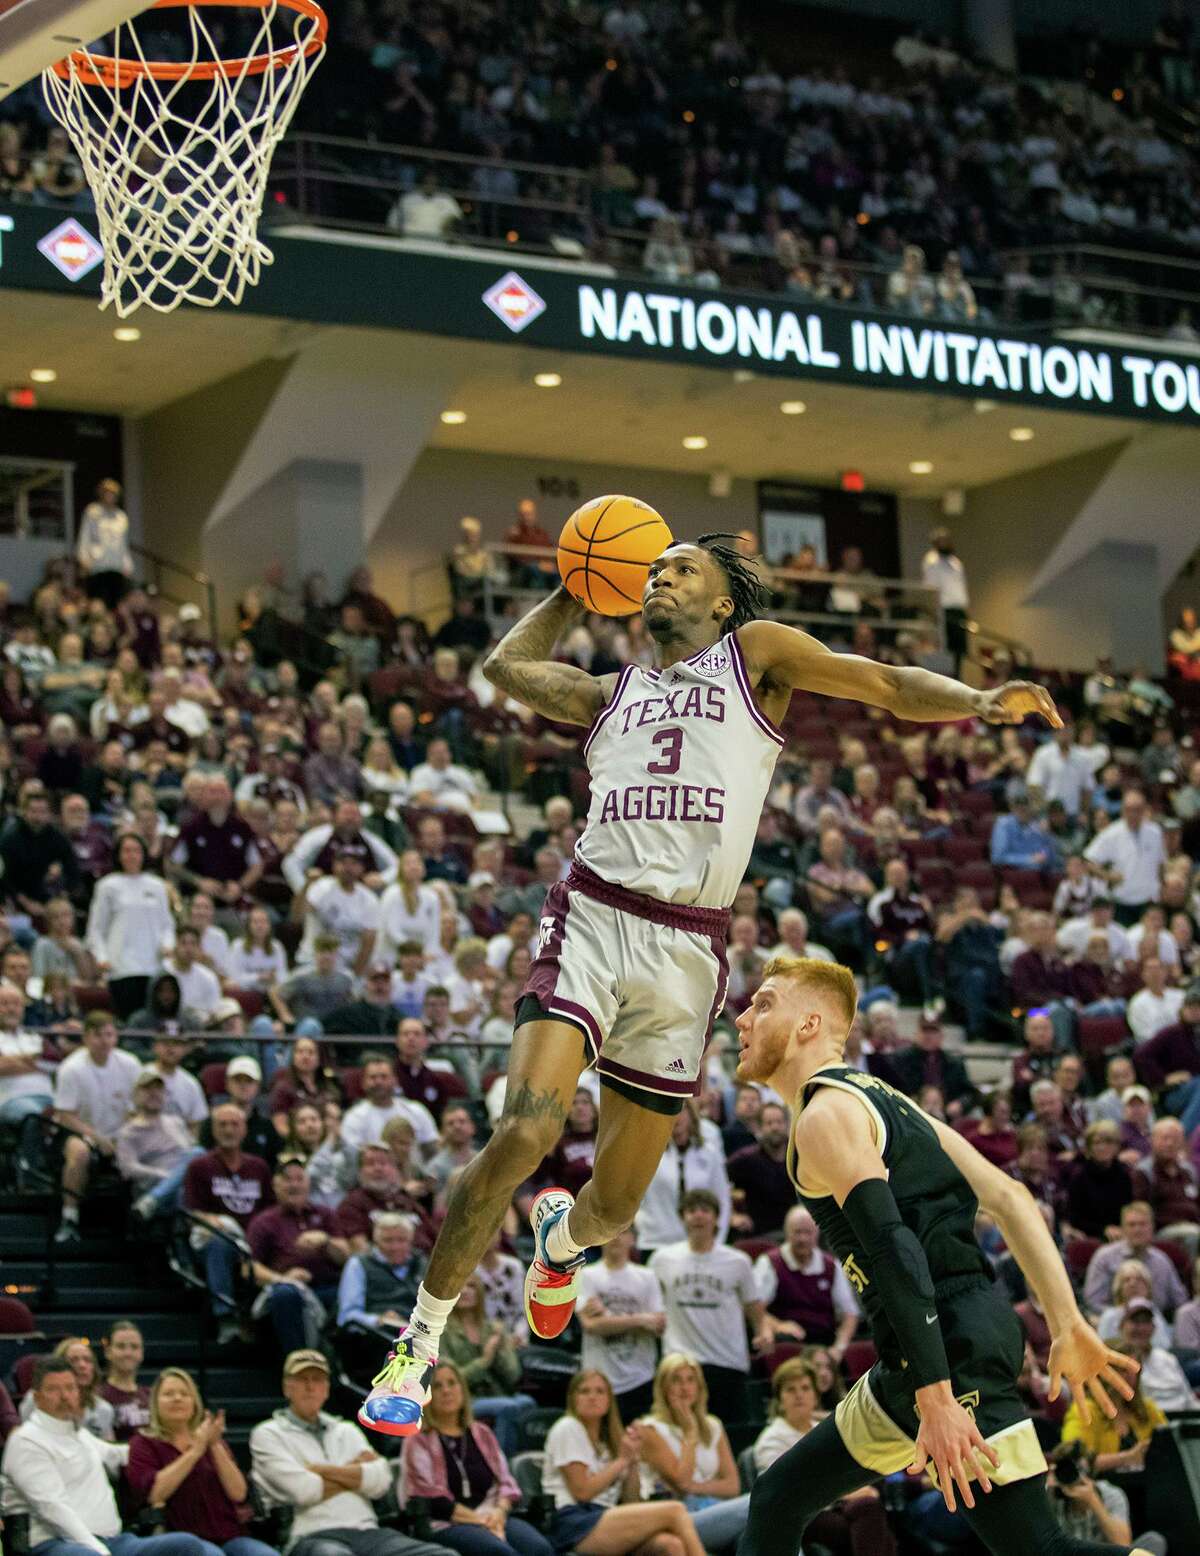 Texas A&M’s Quenton Jackson (3) flies through the air for a dunk over Wake Forest’s Cameron Hildreth during the first half of an NCAA college basketball game in the third round of the NIT in College Station, Texas, Wednesday, March 23, 2022.